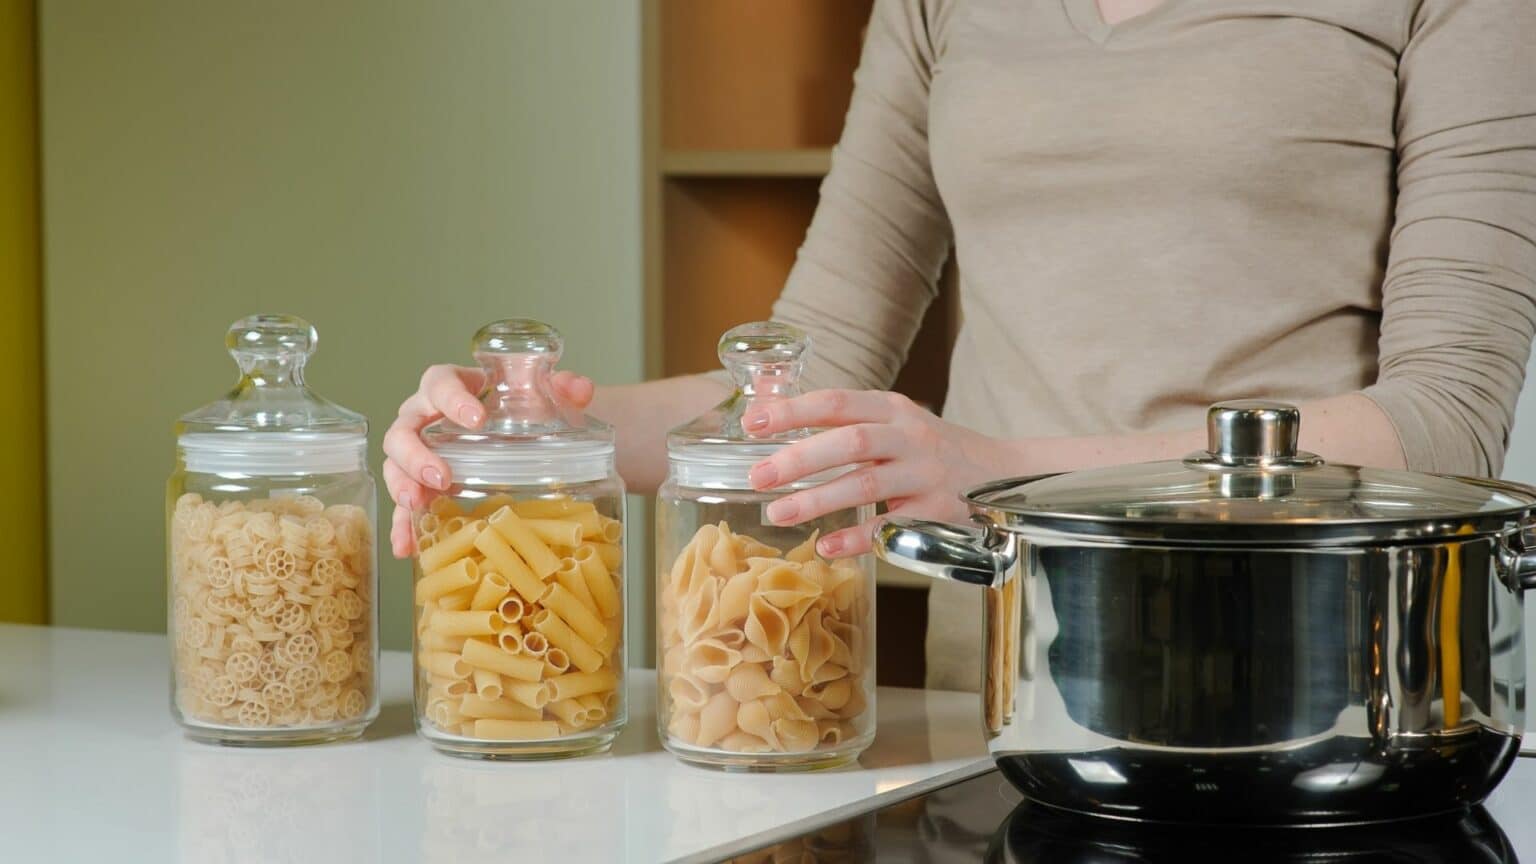 Criteria for Choosing a Pasta Storage Container